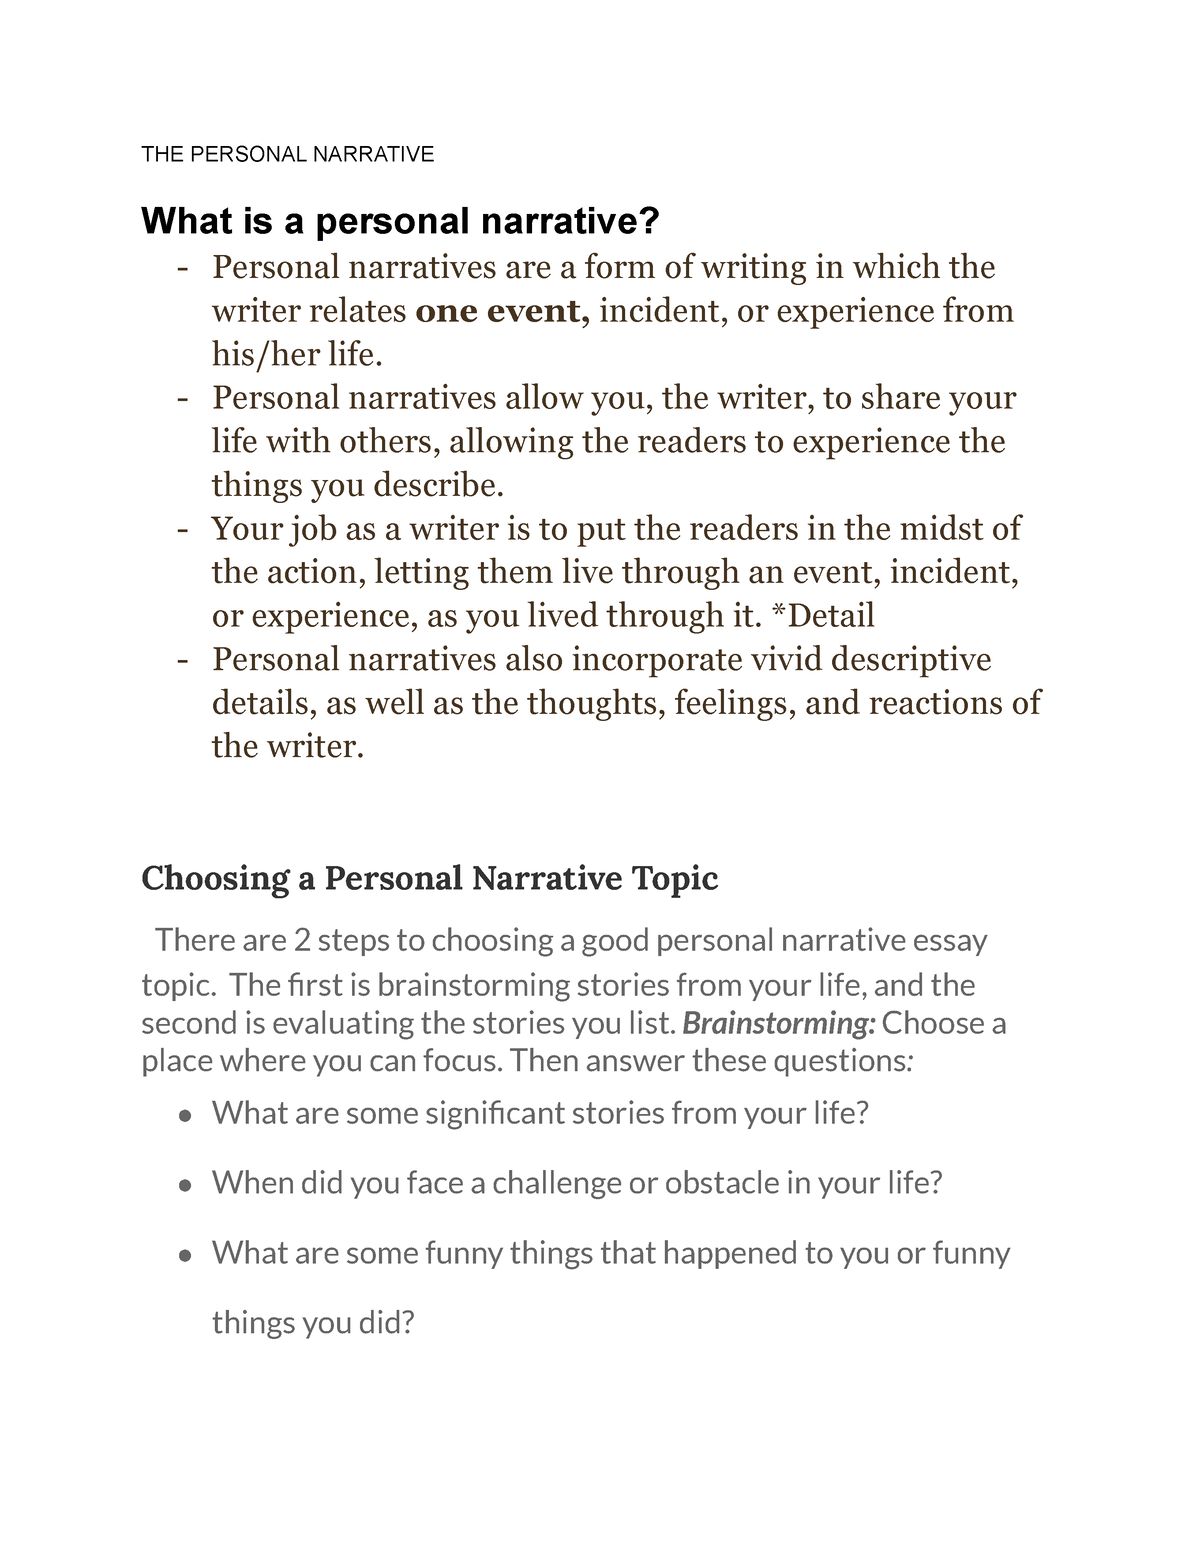 THE Personal Narrative - THE PERSONAL NARRATIVE What is a personal ...